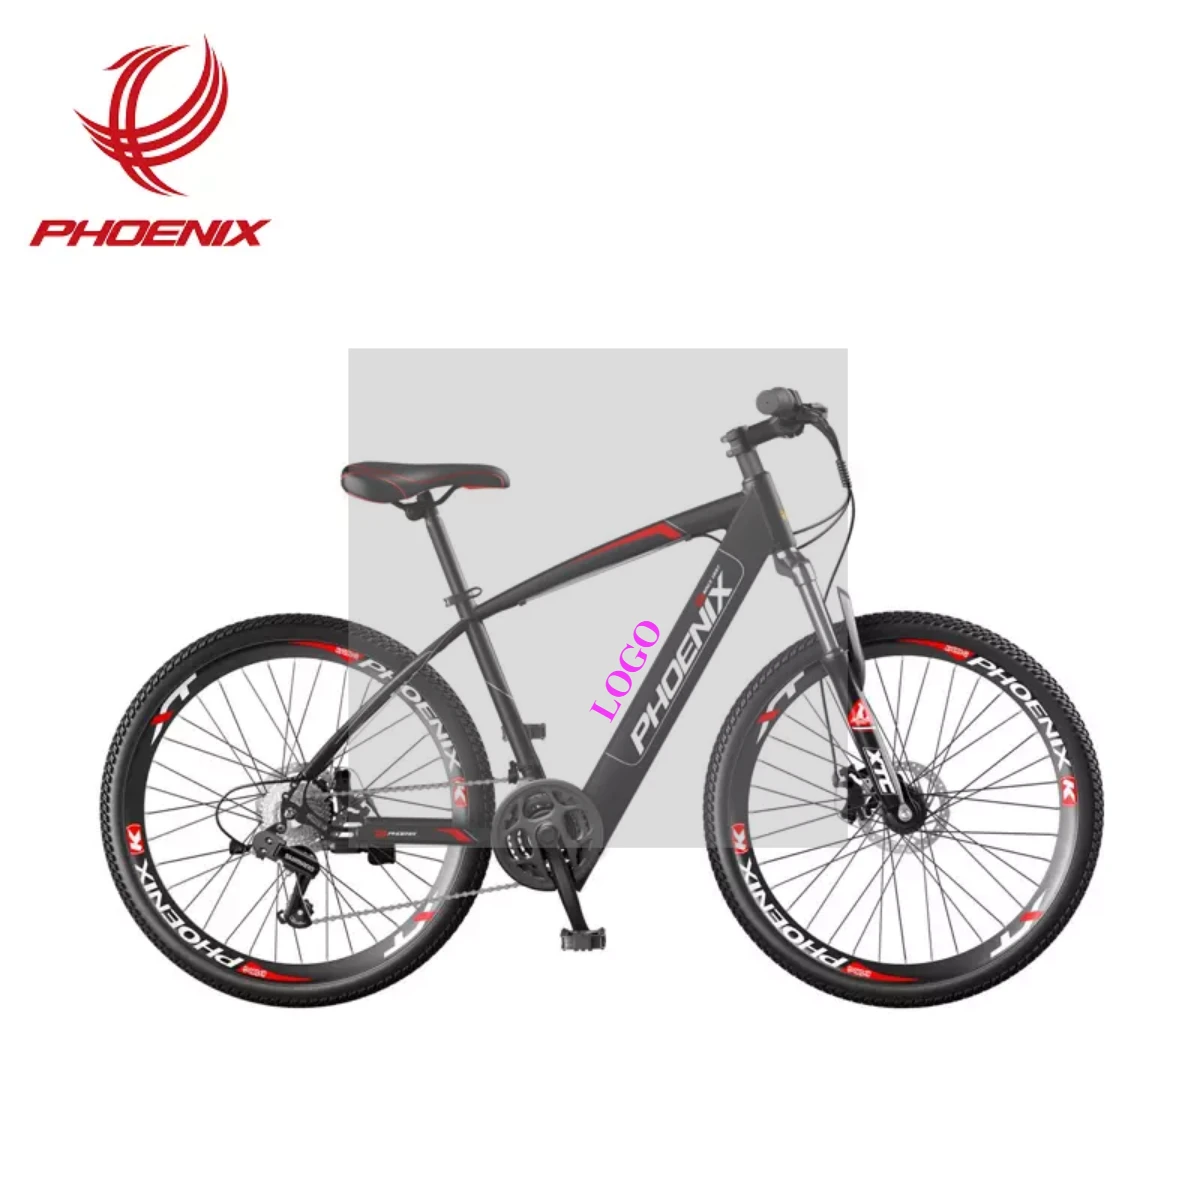 2021 Phoenix Lithium Battery Bicycle   26 Inch 16AH  Brushless Motor LCD Display 21 Speeds Electric Mountain  Bicycle